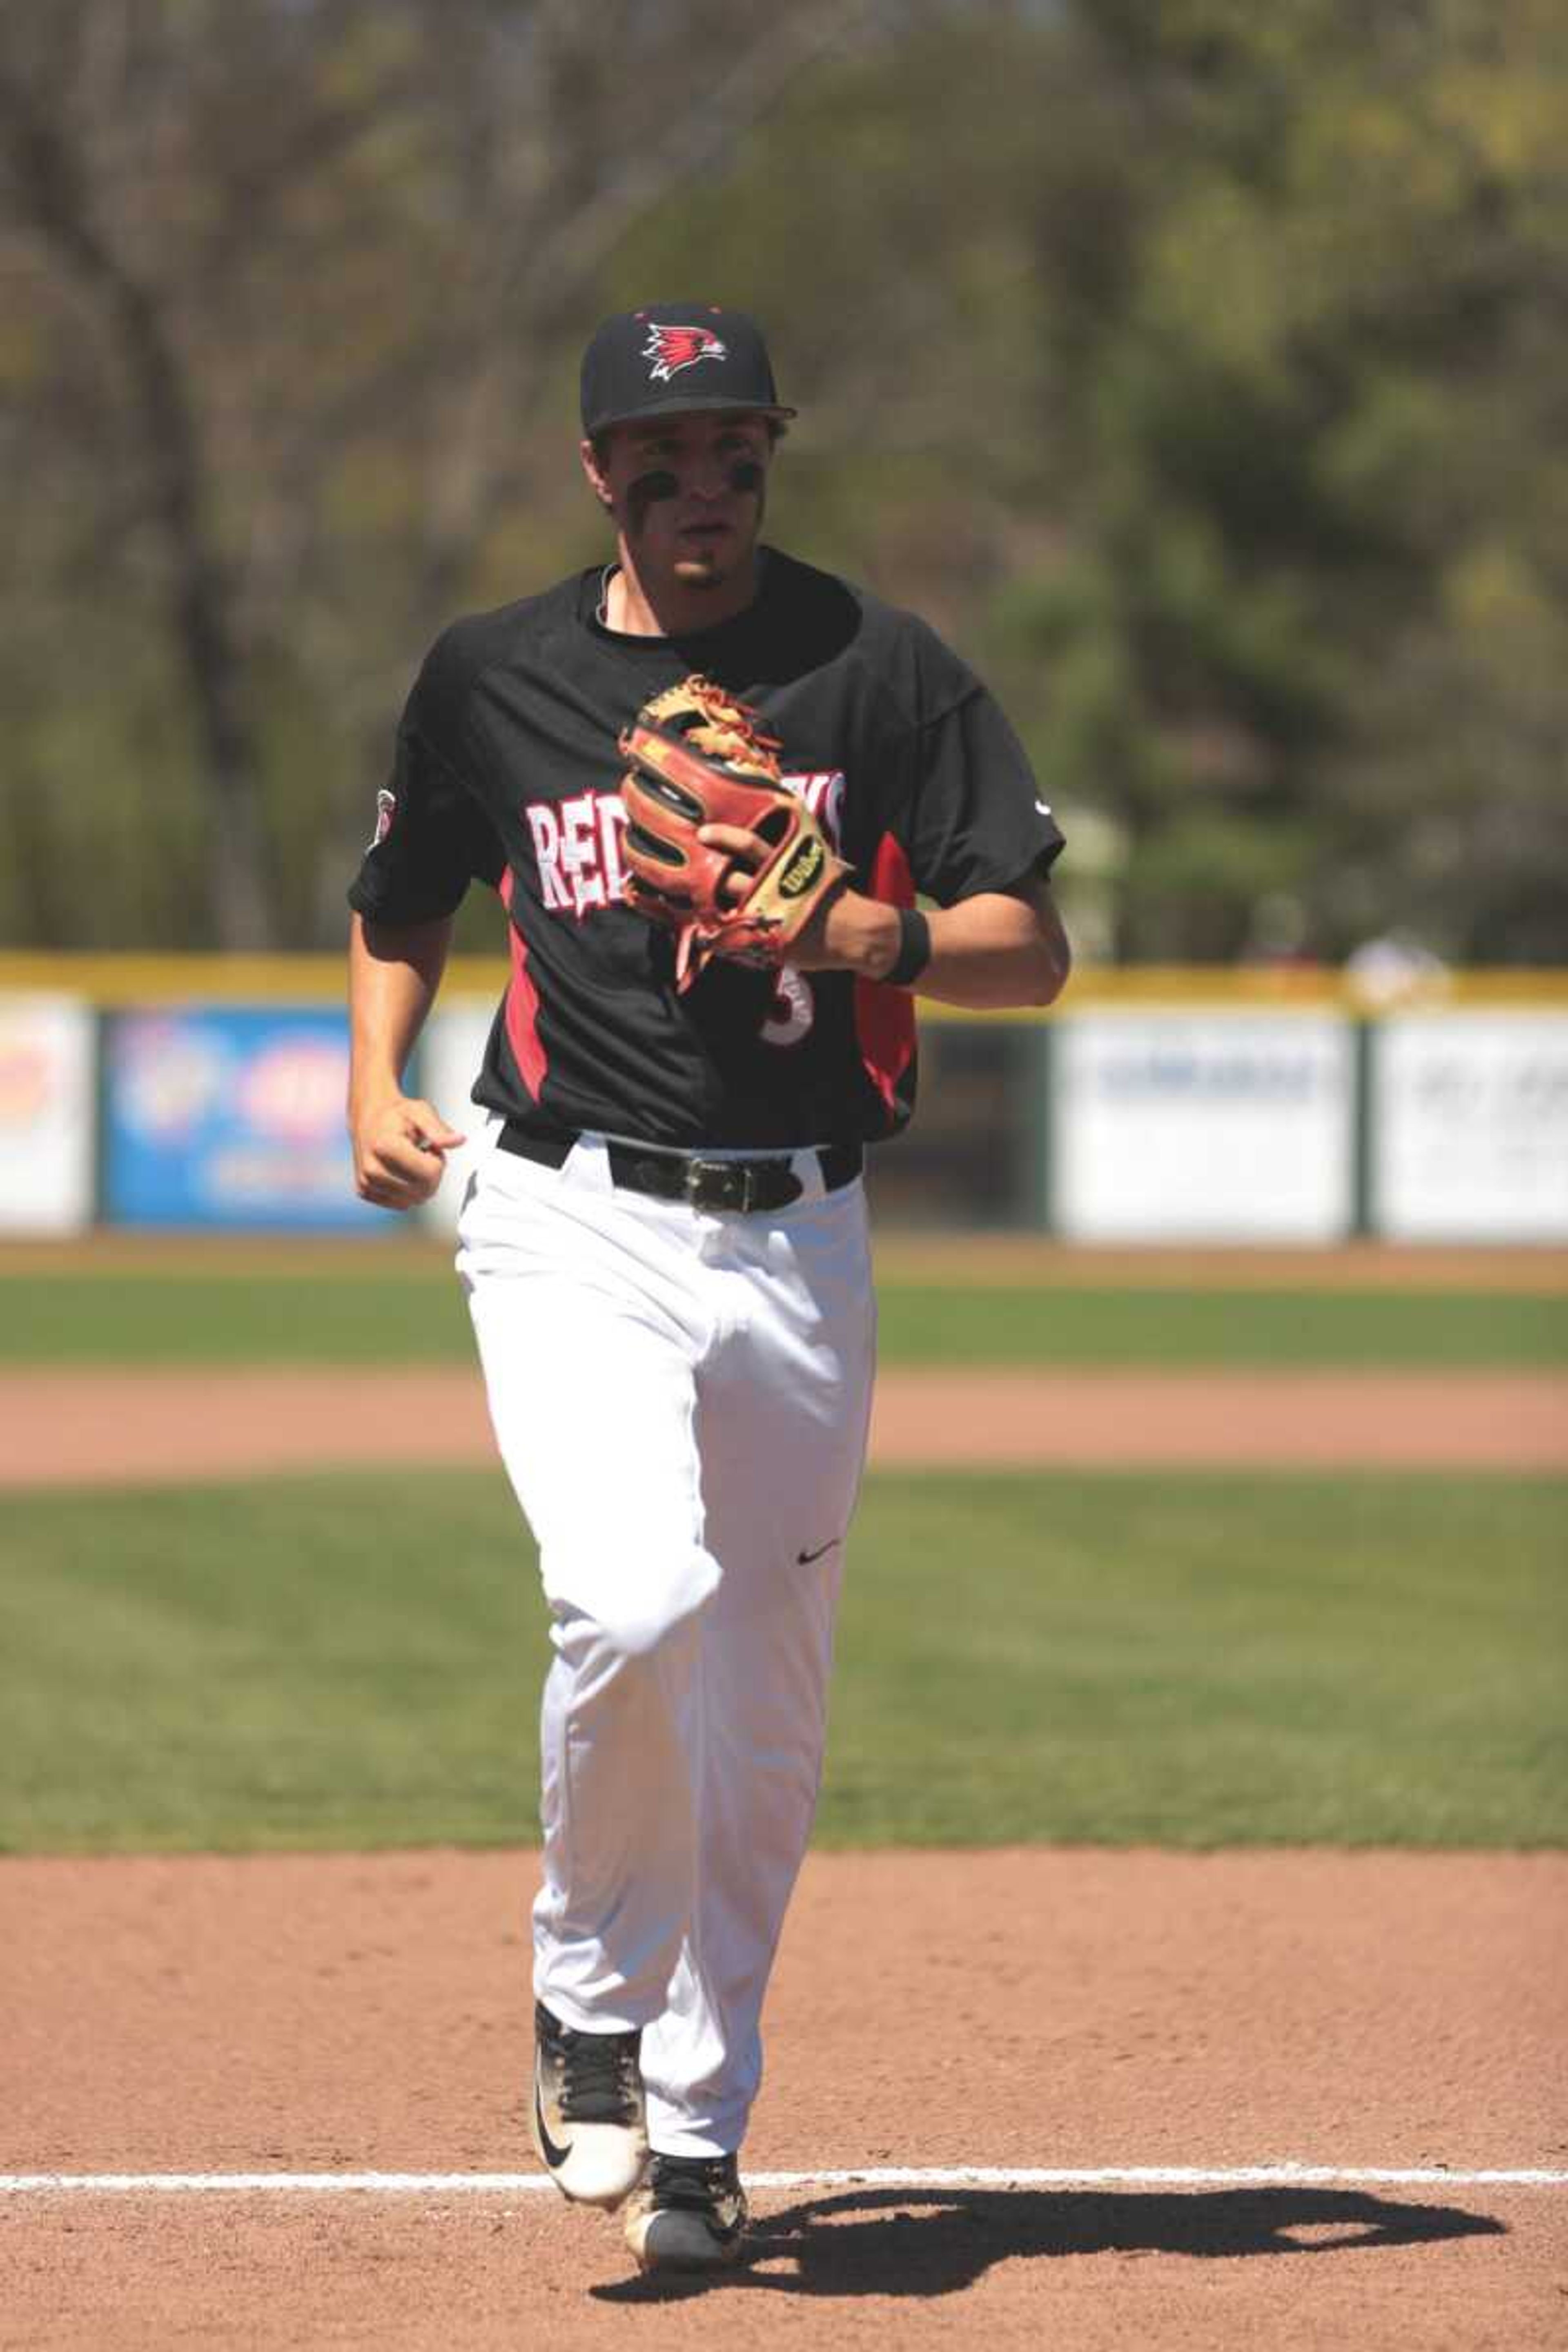 Senior shortstop Brandon Boggetto leads Southeast's offense with a .359 batting average, 10 doubles and 36 runs scored.